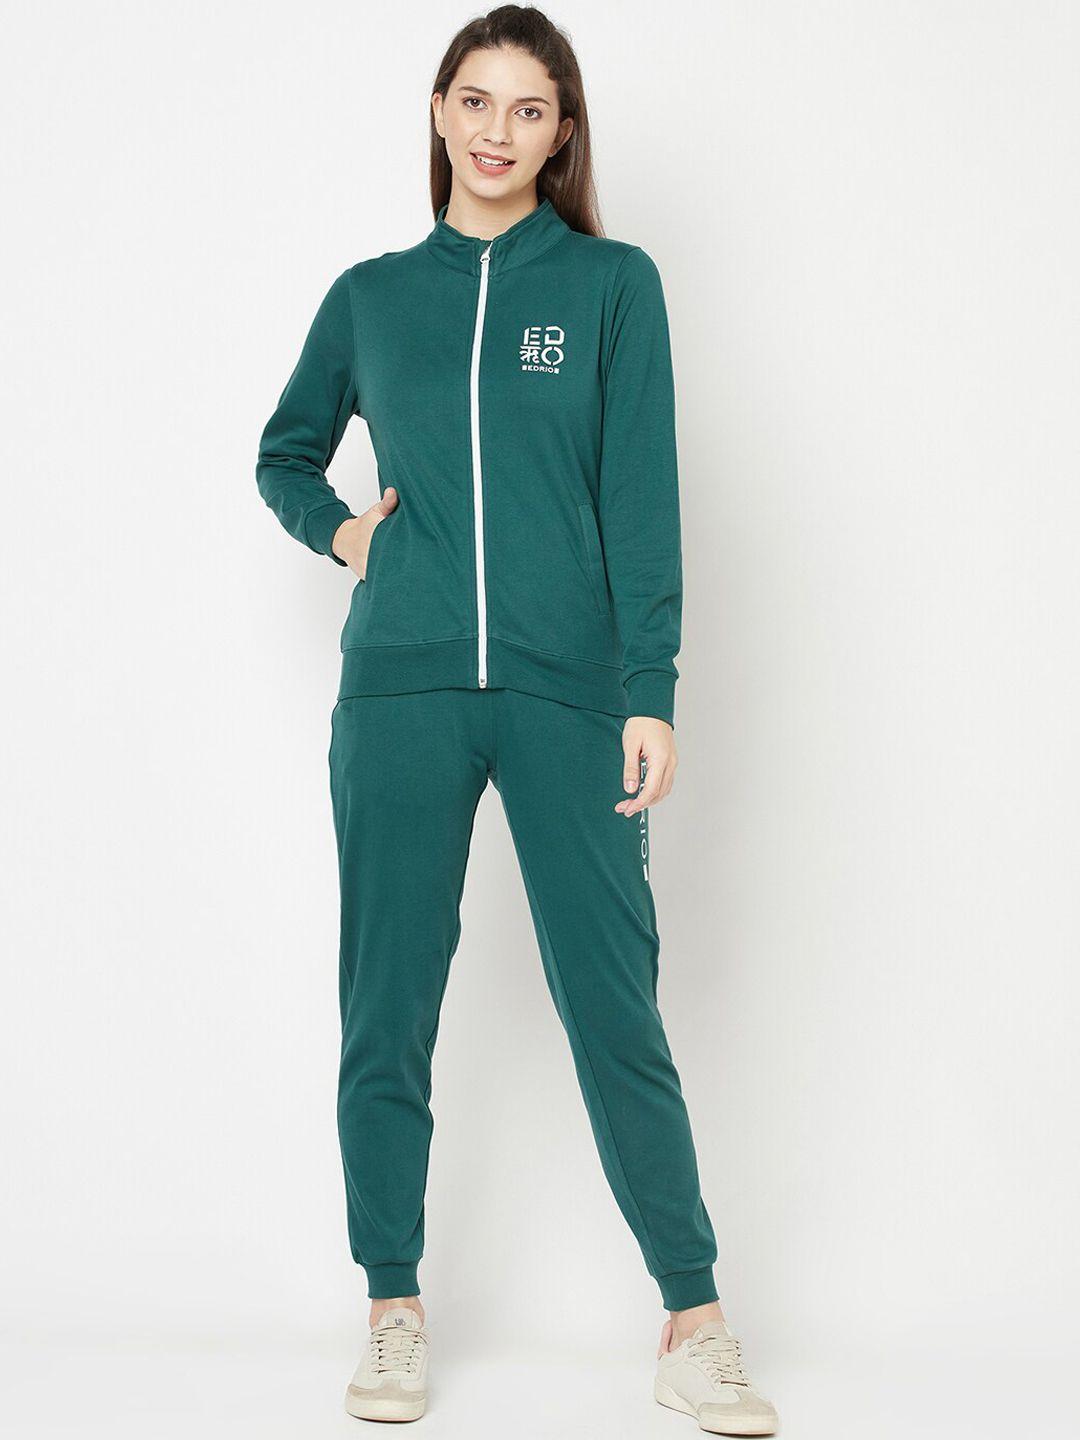 edrio women green solid cotton tracksuits